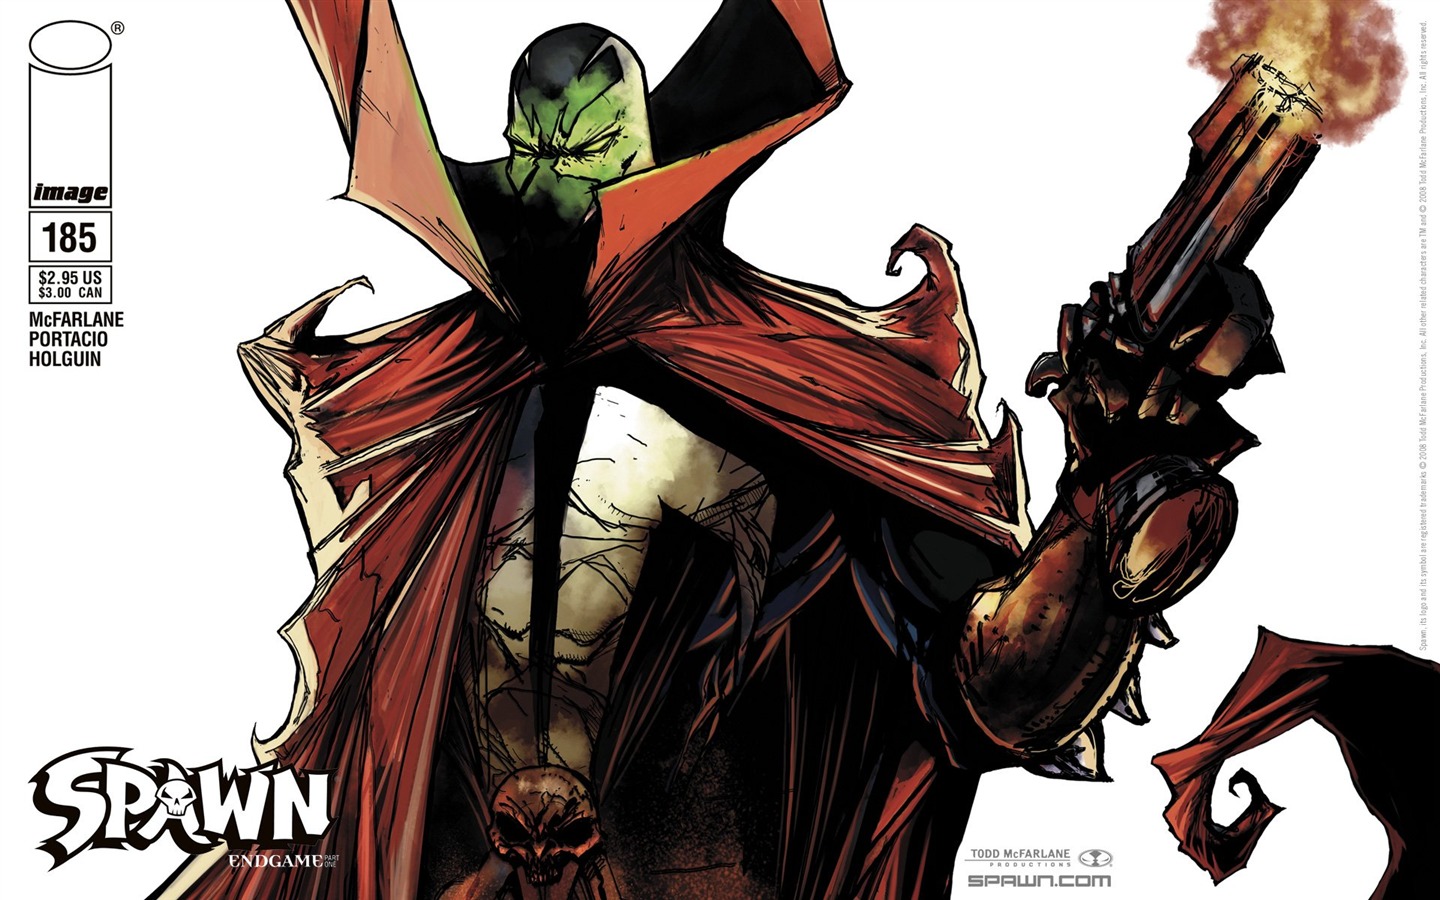 Spawn HD Wallpapers #7 - 1440x900